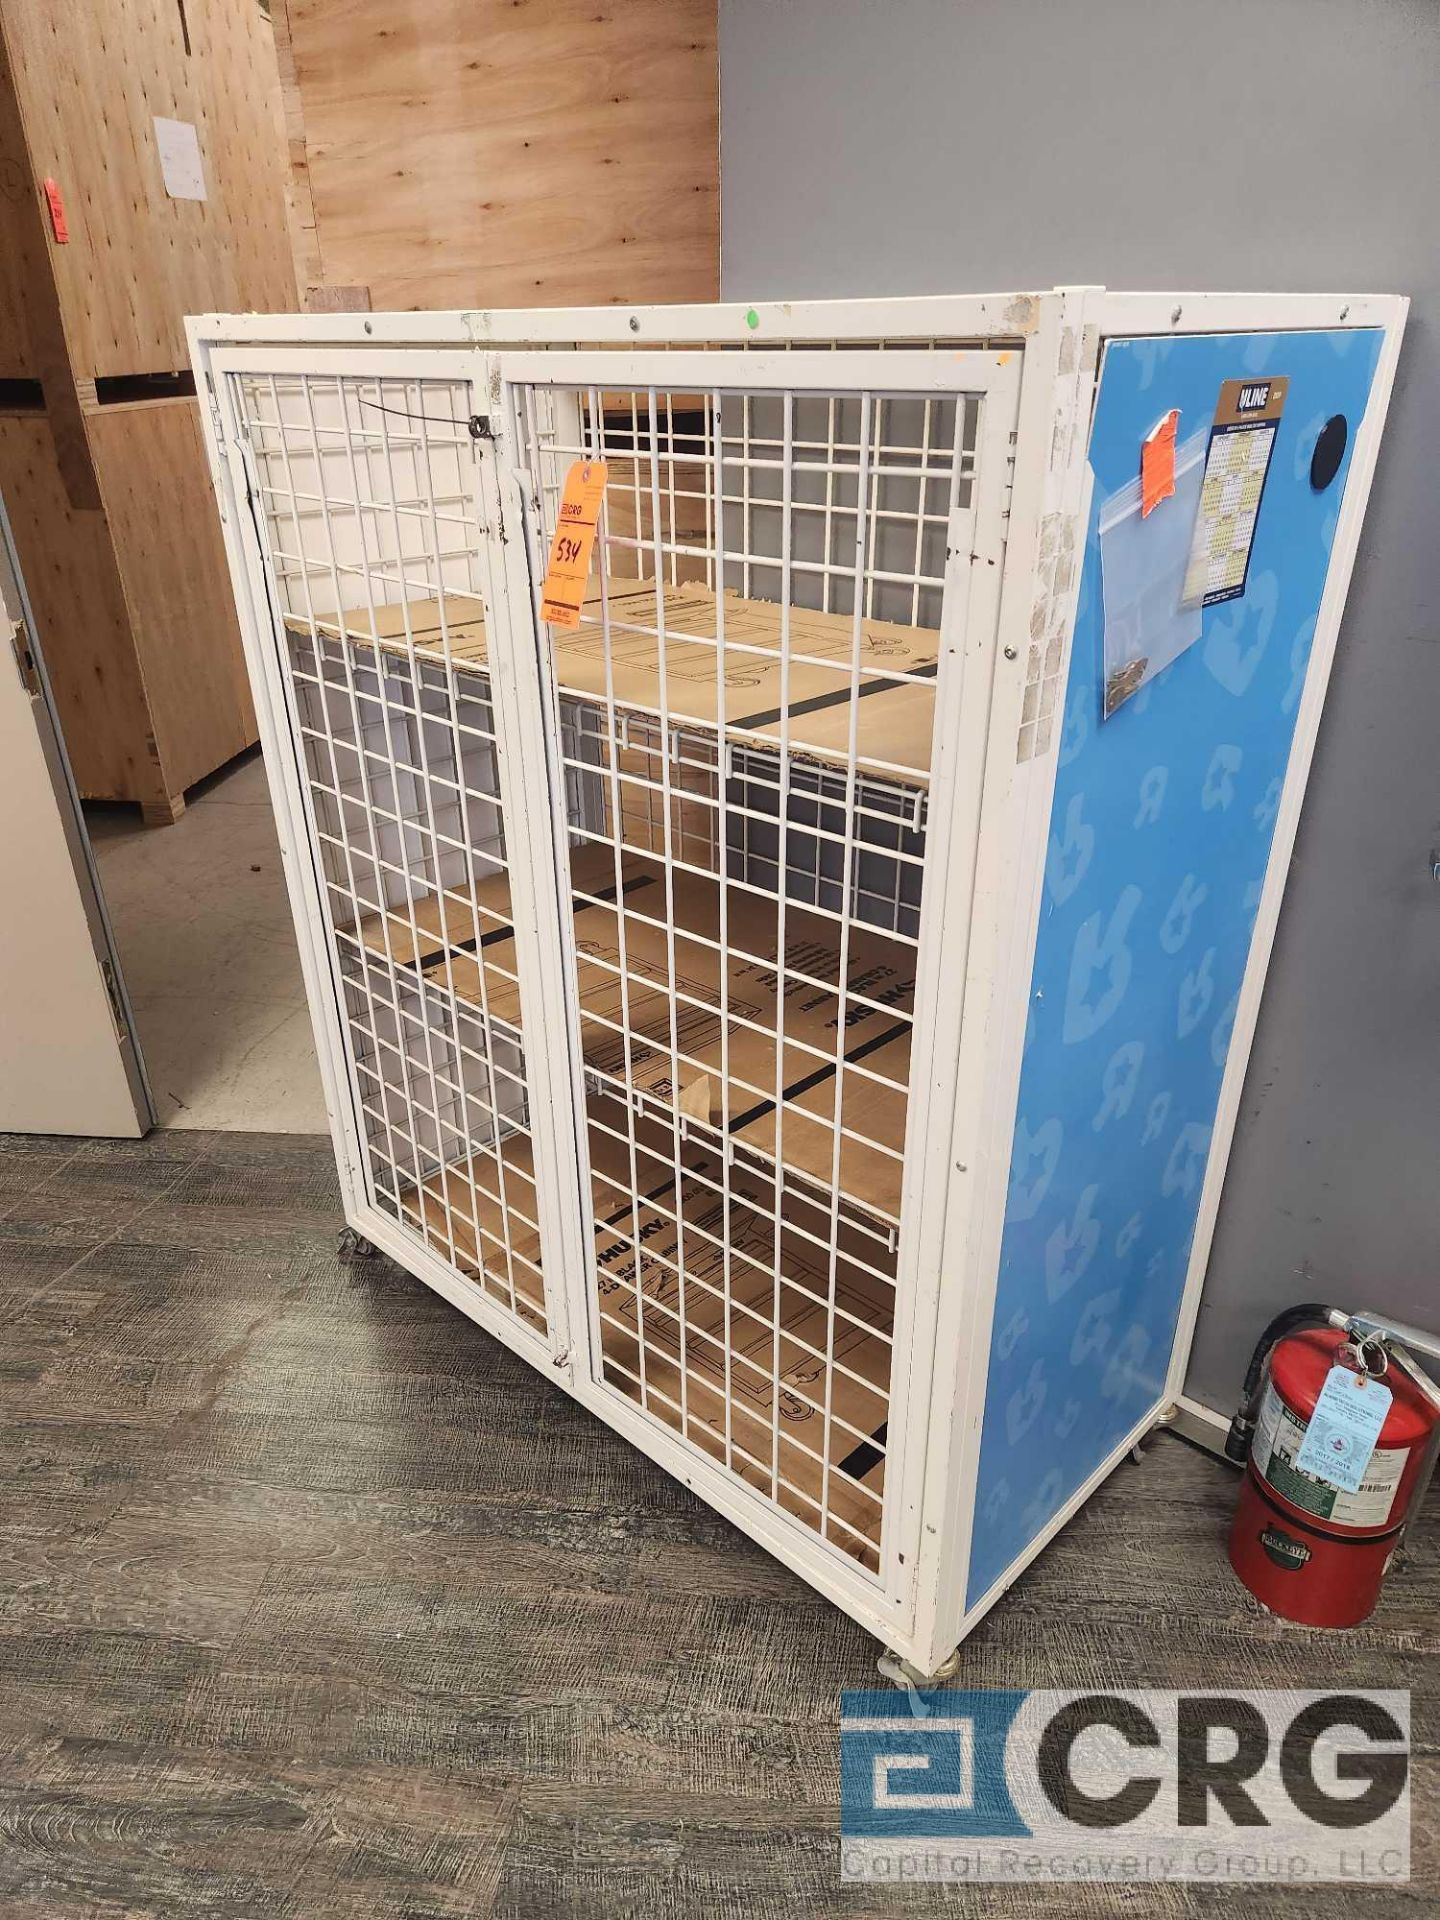 4 ft X 4 ft X 24 inch deep portable storage cage